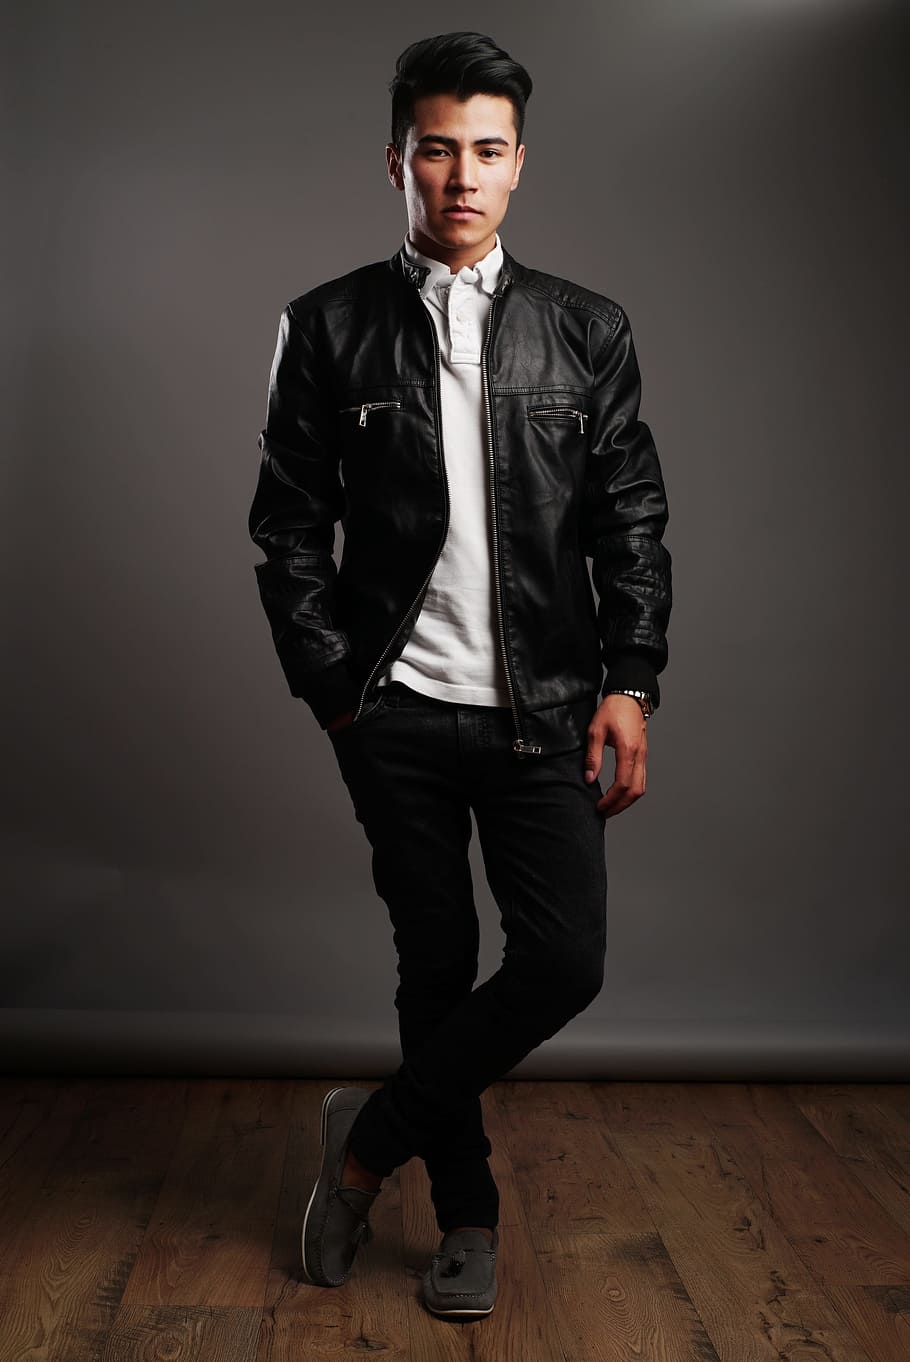 man in black leather jacket, white shirt, and black pants, straight looking